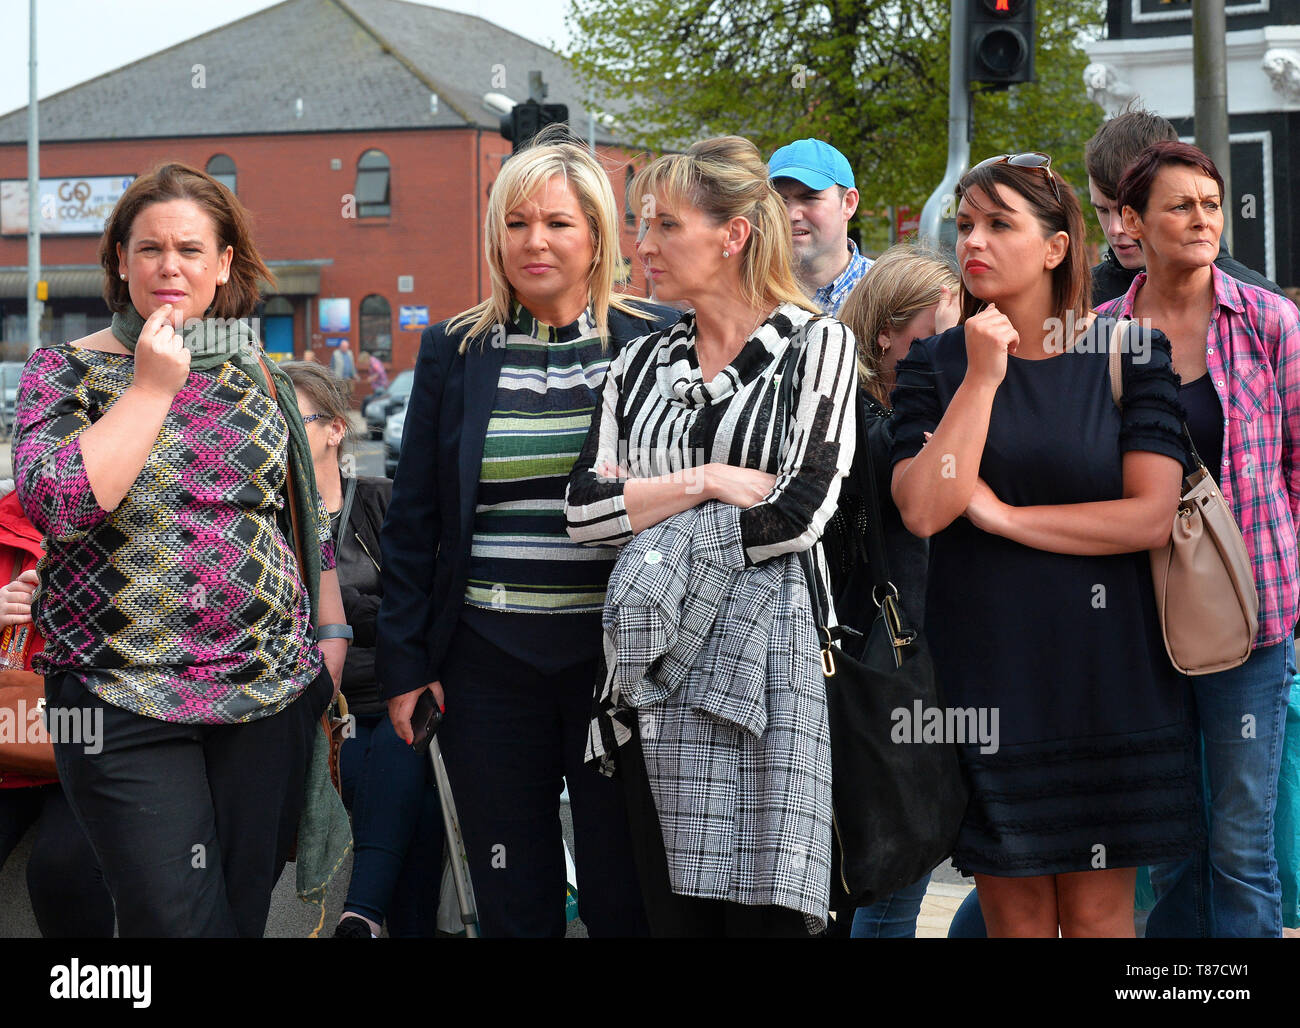 Sinn Fein leaders Mary Lou McDonald TD, Michelle O'Neill MLA, Martina Anderson MEP and Elisha McCallion MP attend a NUJ organised vigil, in Guildhall Square, Derry, for murdered journalist Lyra McKee. ©George Sweeney / Alamy Stock Photo